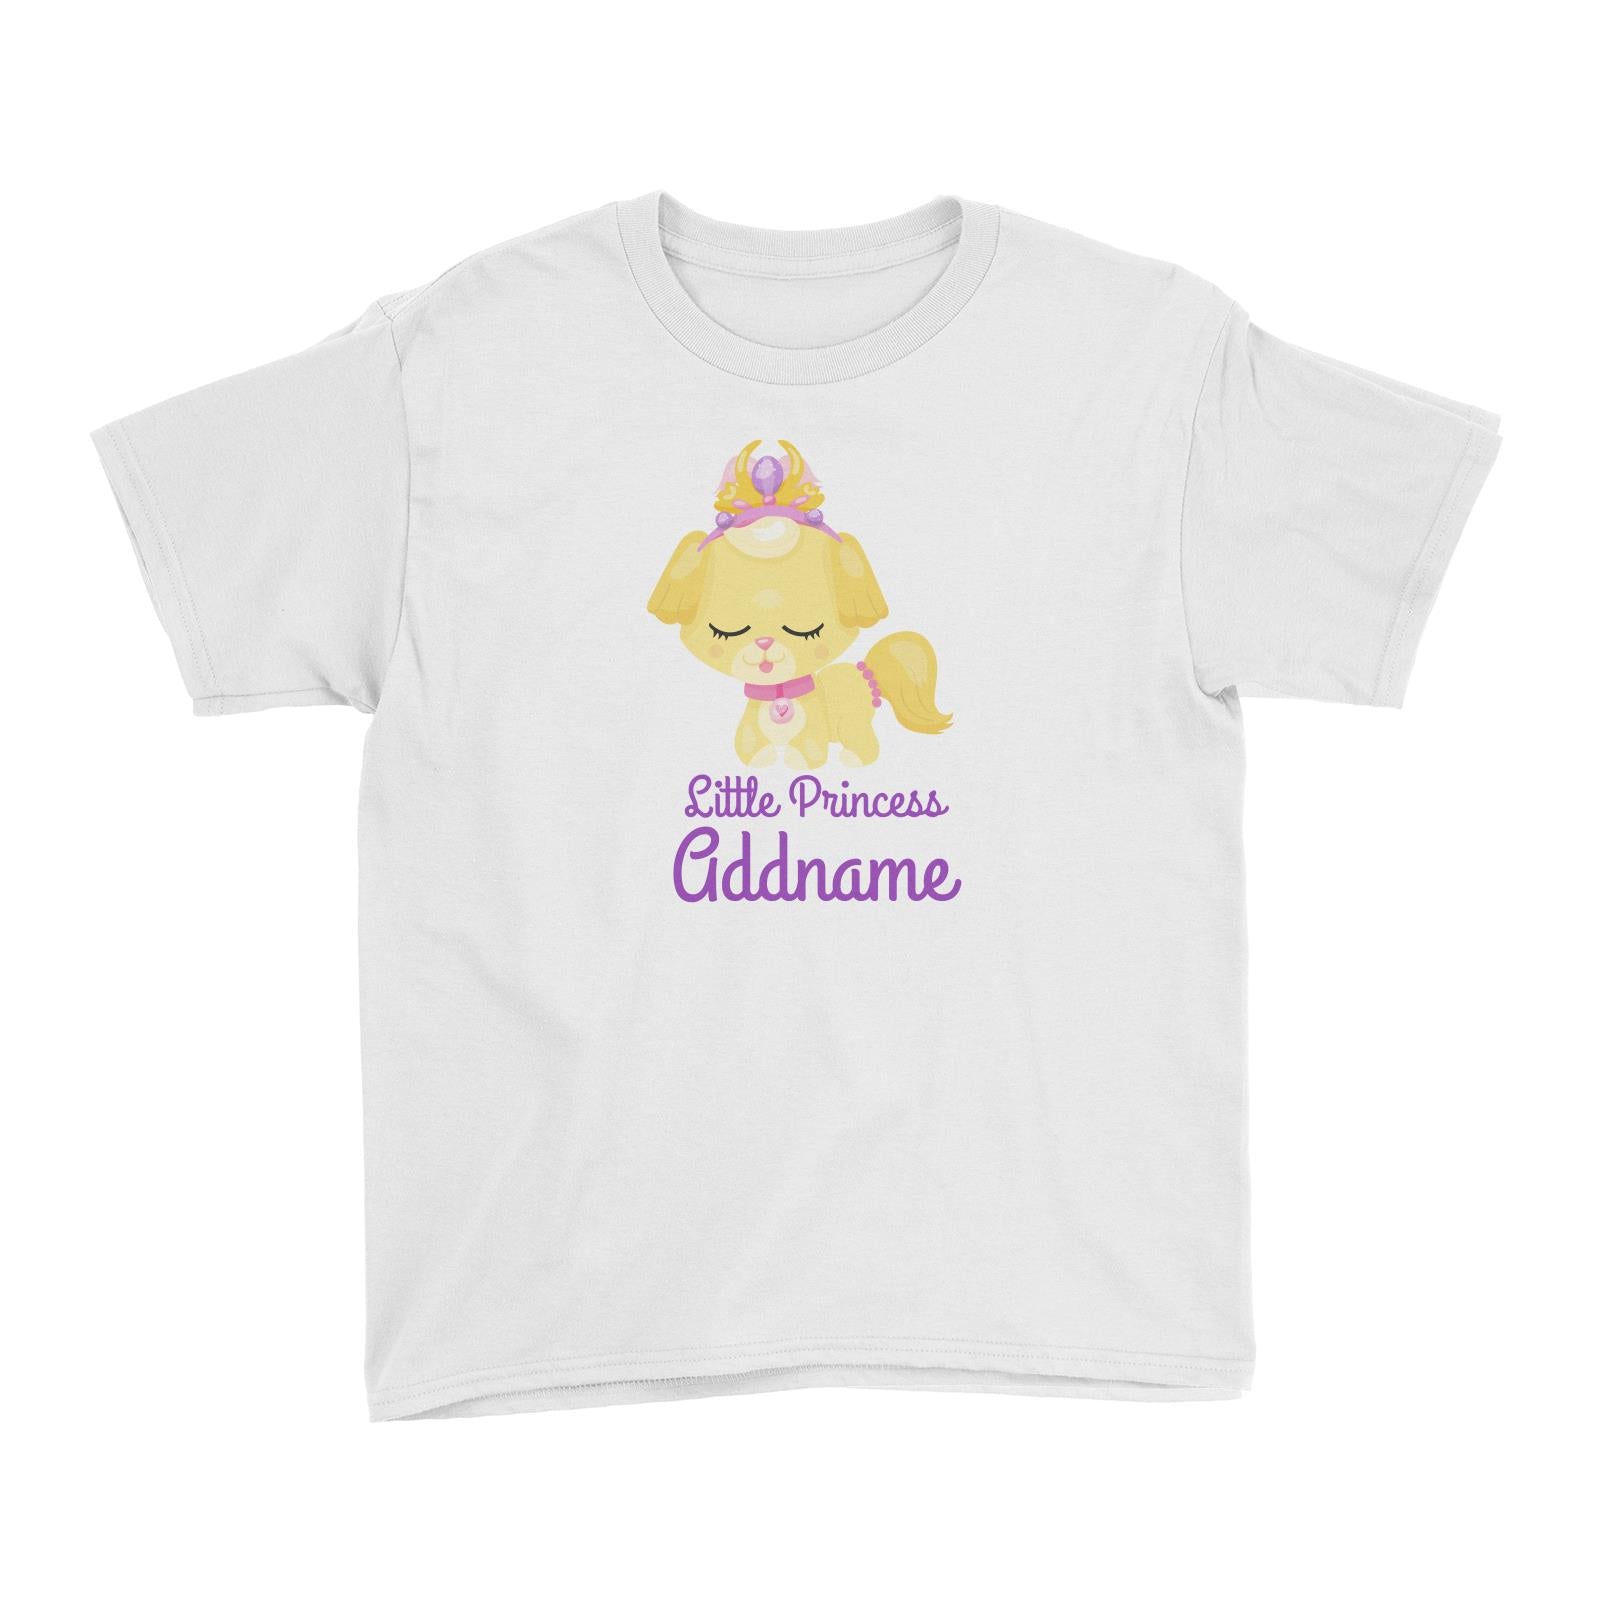 Little Princess Pets Yellow Dog with Crown Addname Kid's T-Shirt